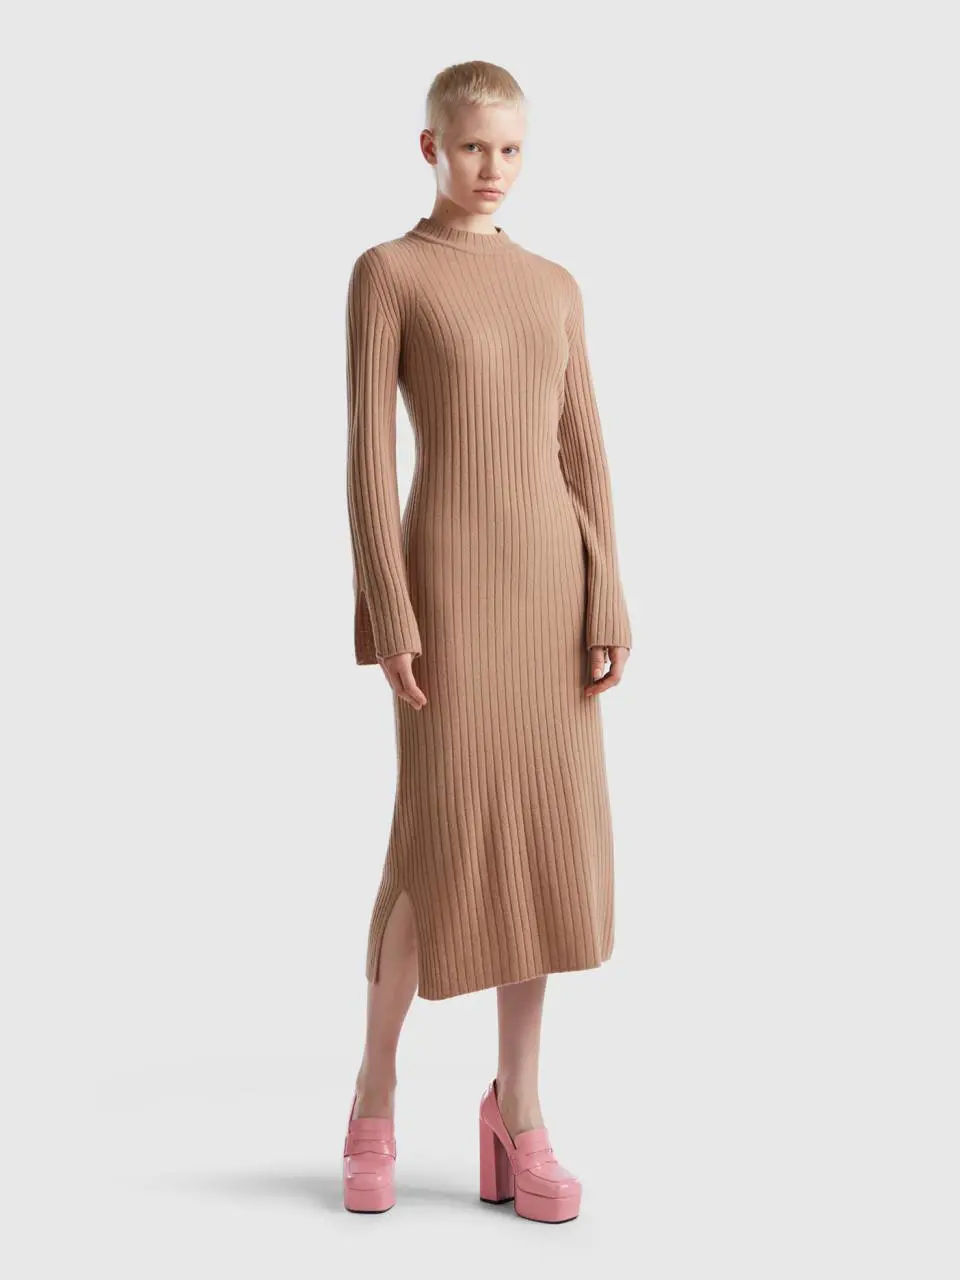 Benetton knit dress with slits. 1